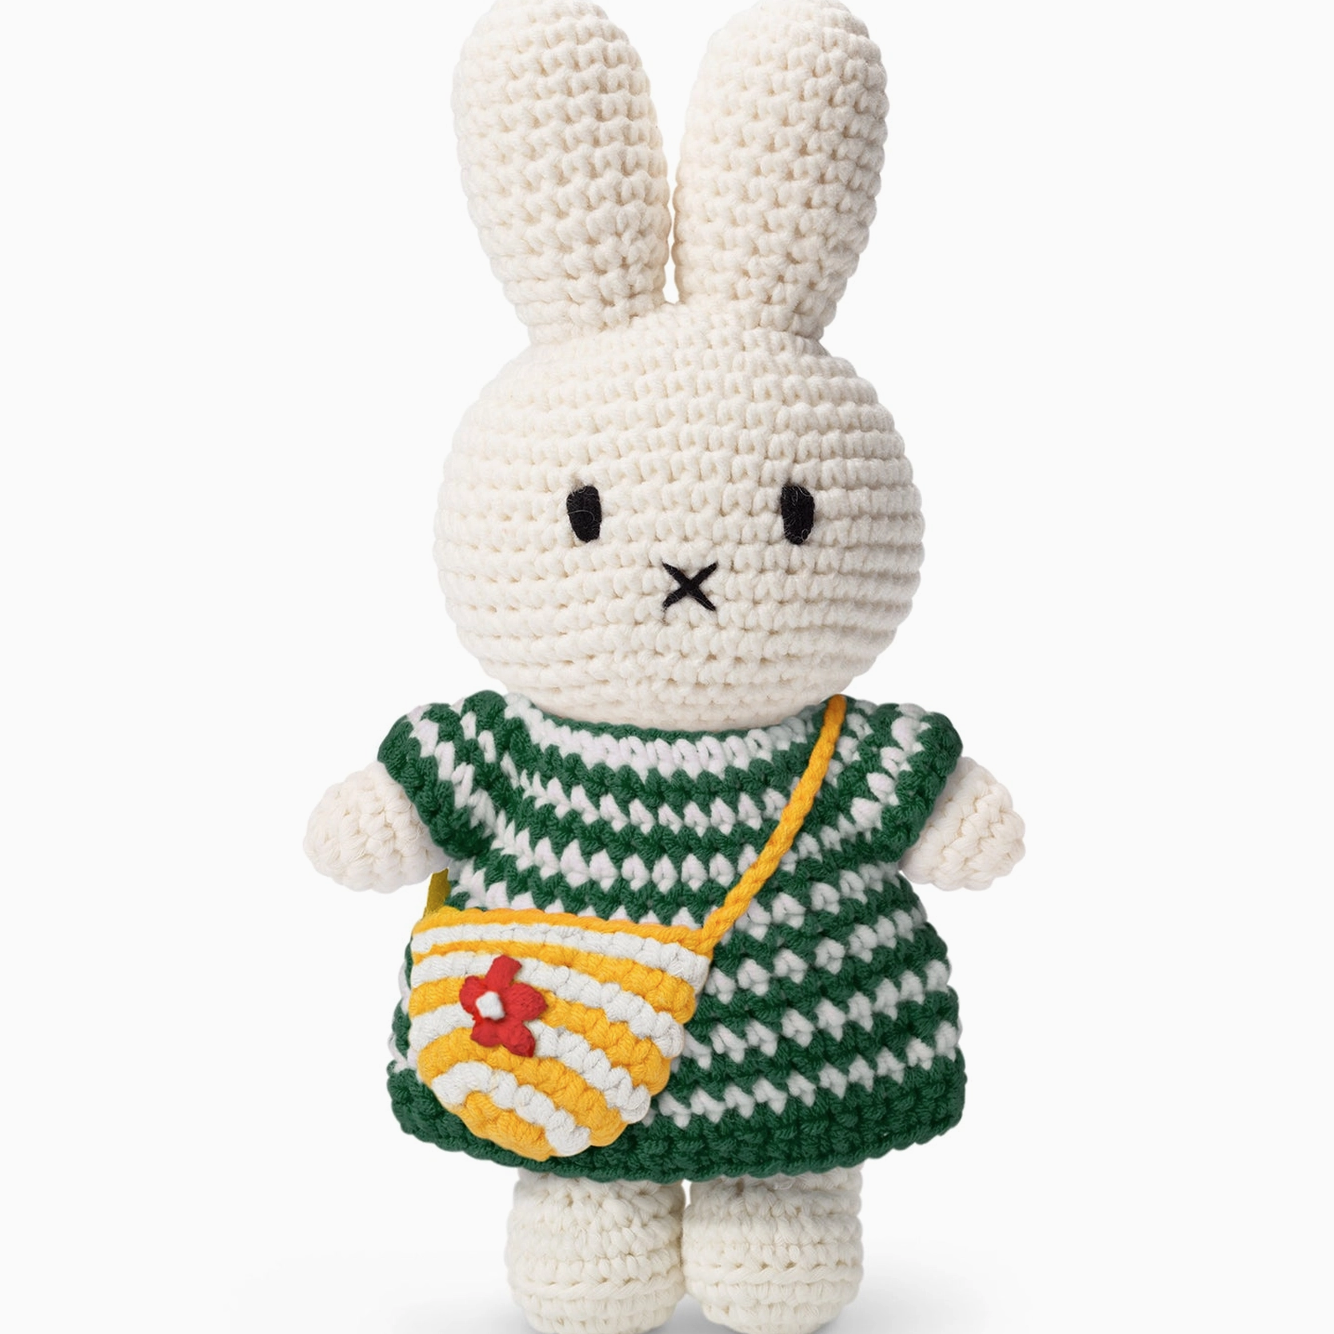 Miffy and Her Striped Bag Handmade Crocheted Soft Toy